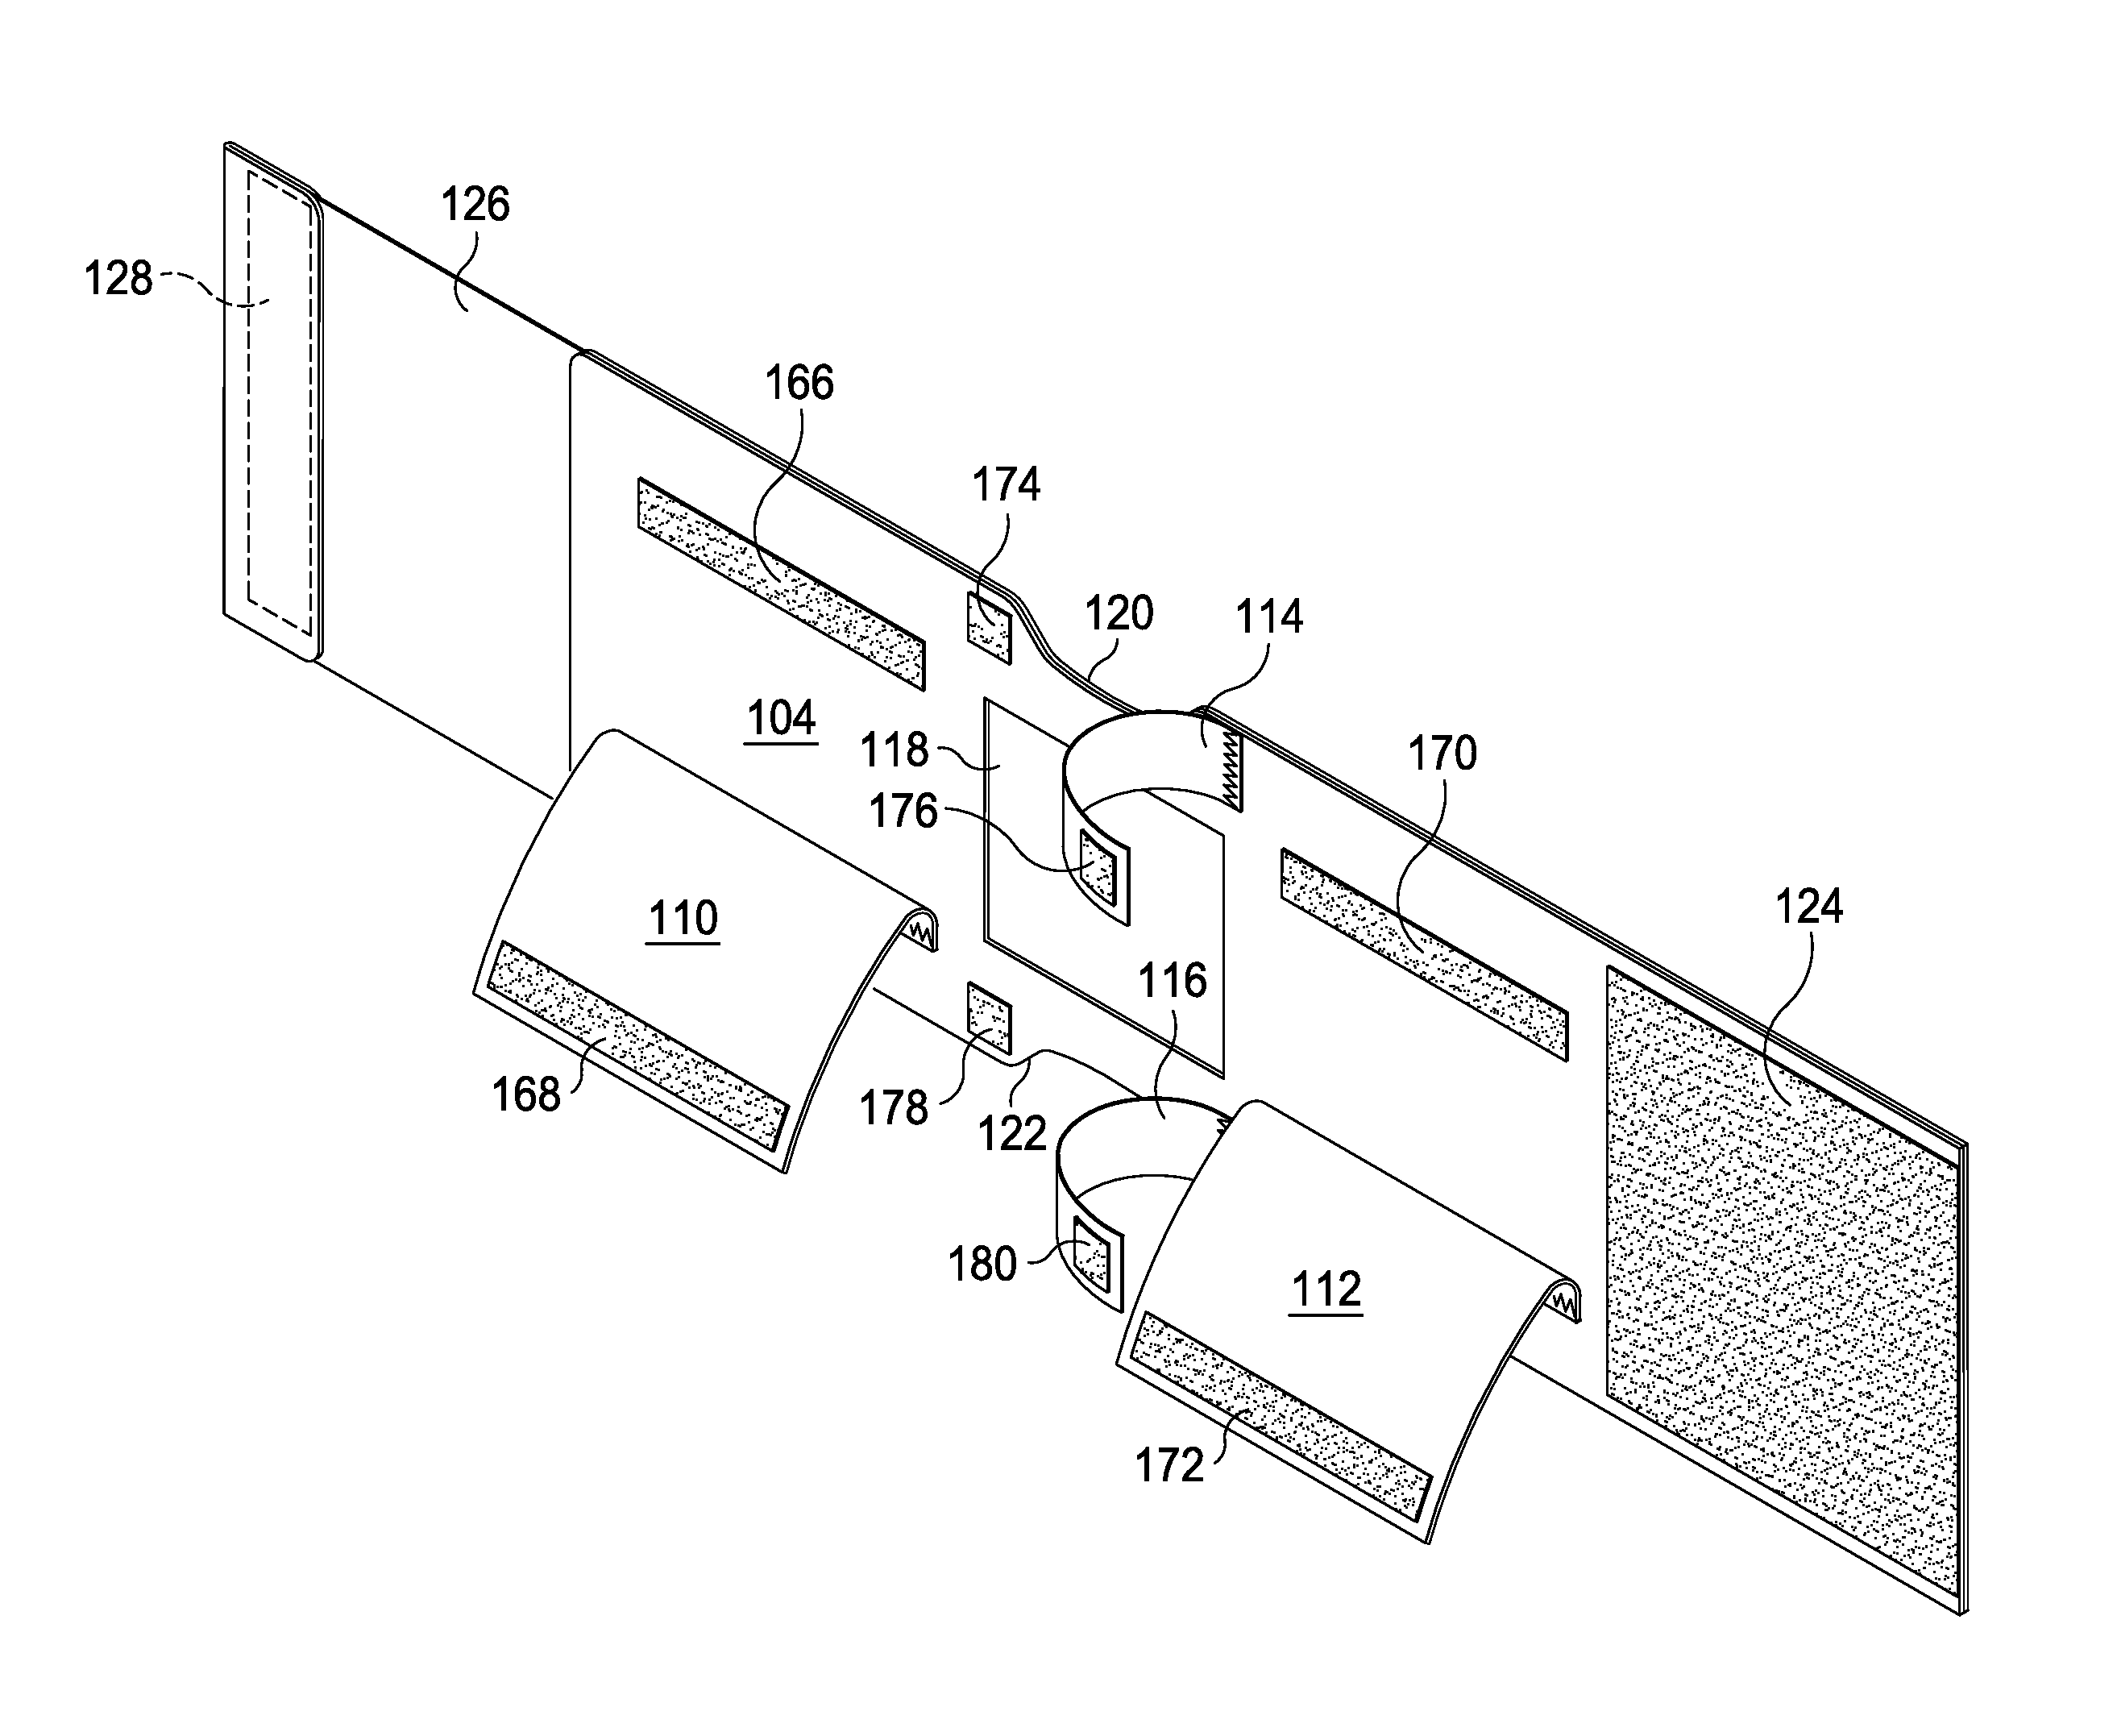 Apparatus and method for controlling visibility and access to central venous access devices